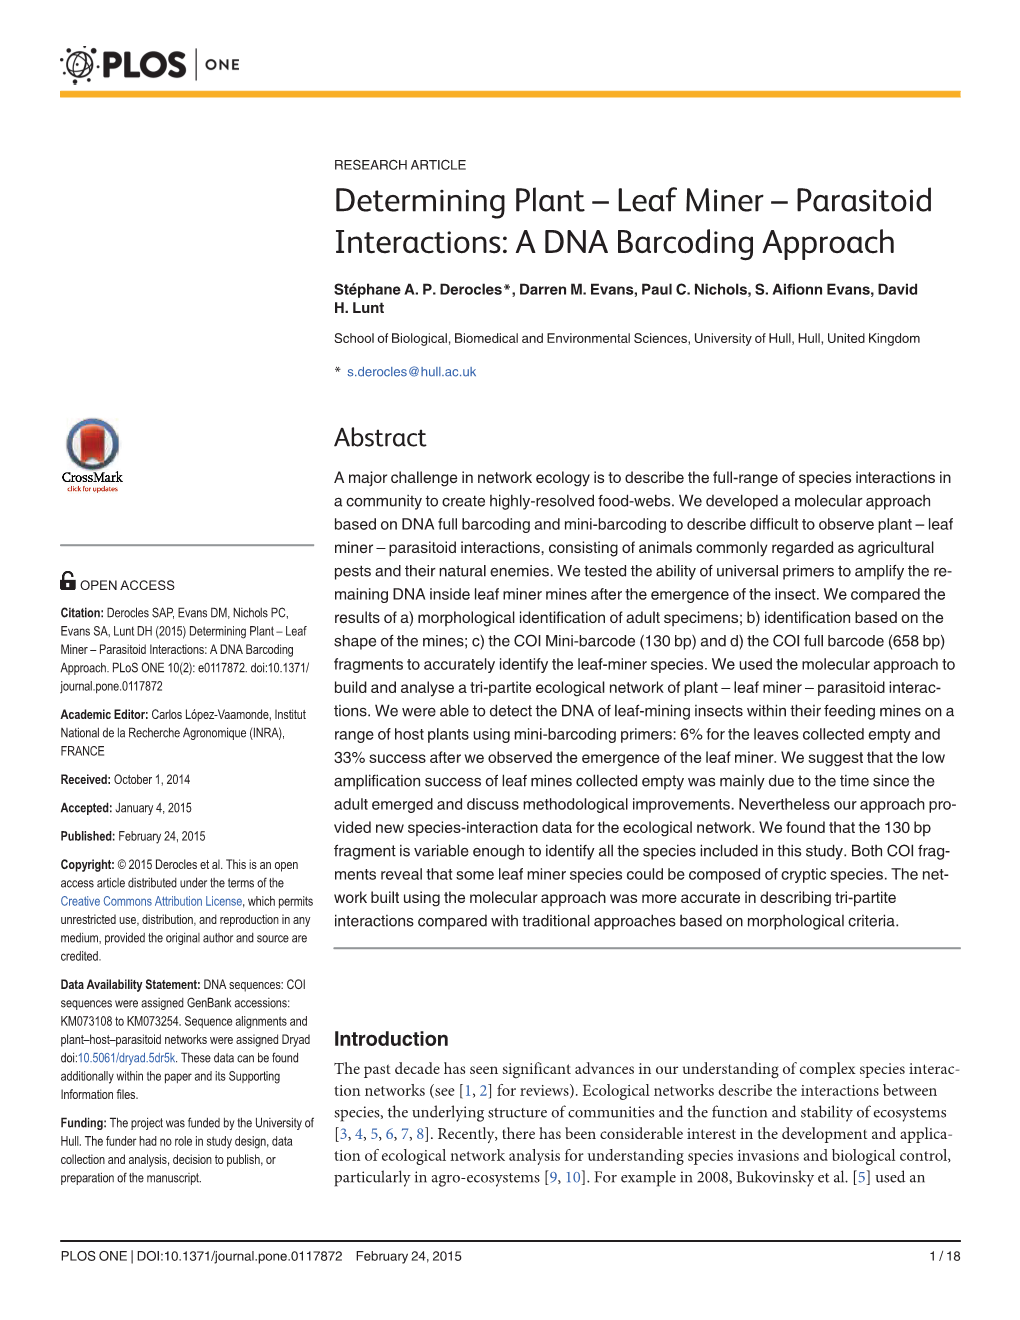 Determining Plant–Leaf Miner–Parasitoid Interactions: a DNA